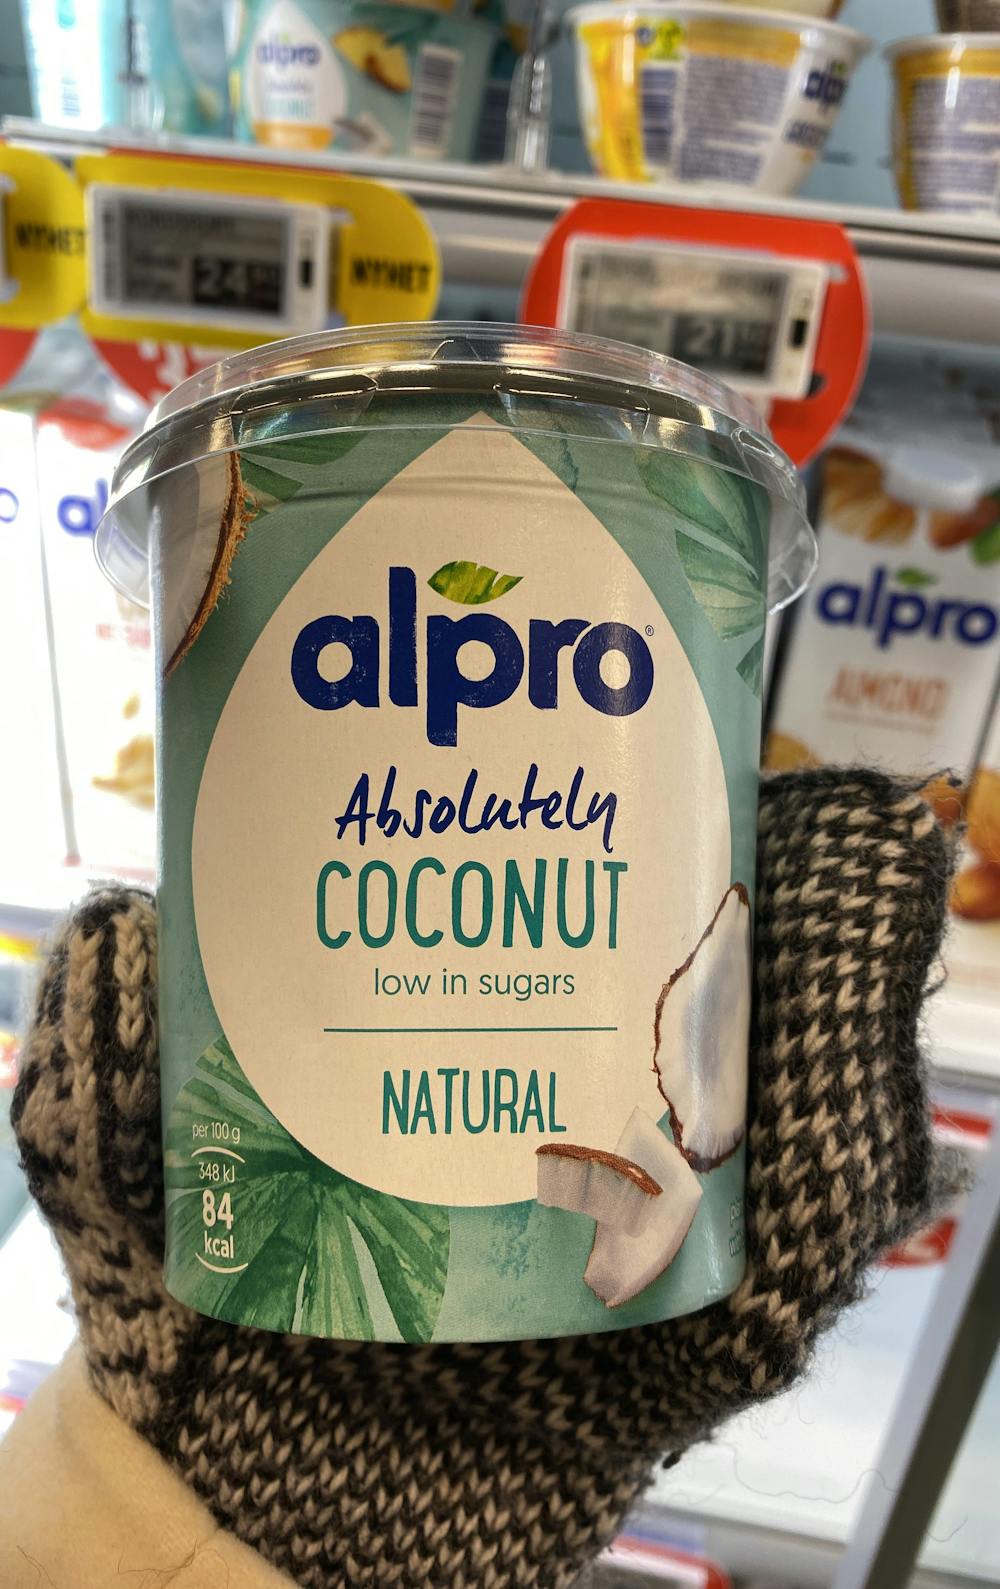 Absolutely coconut natural, Alpro